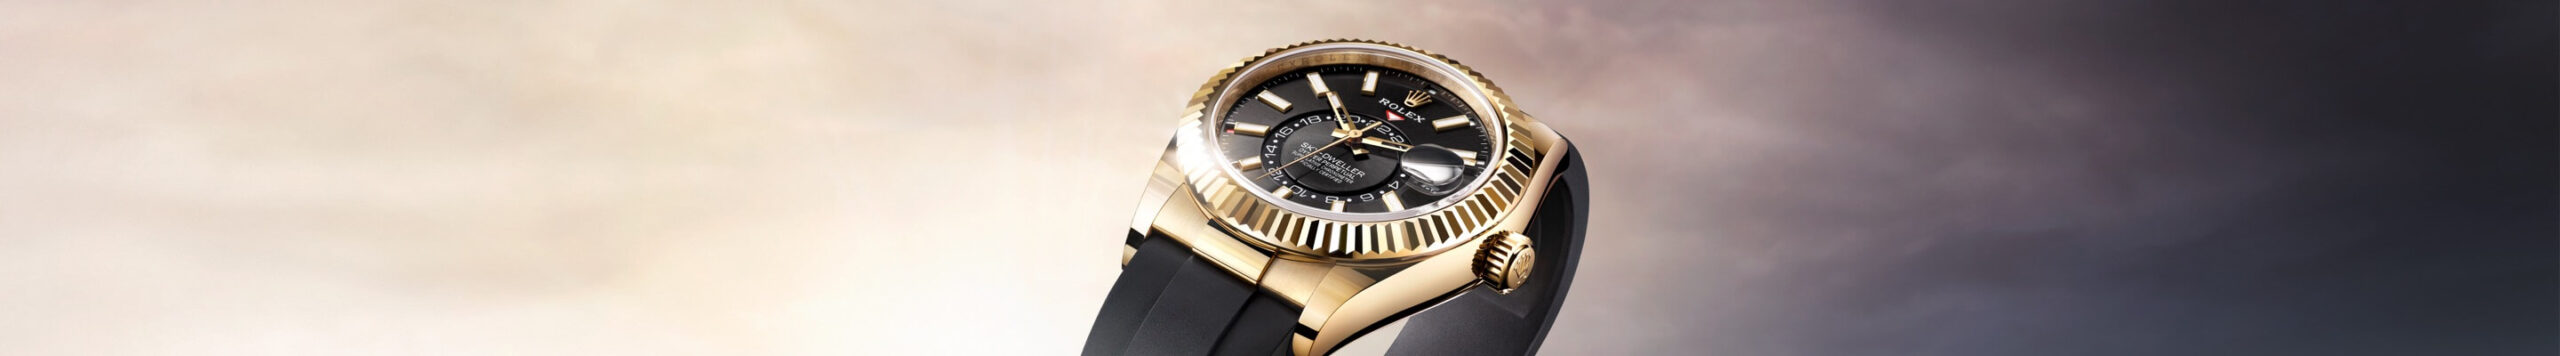 An elegant gold and black wristwatch with a detailed dial, displayed against a soft, gradient sky background.